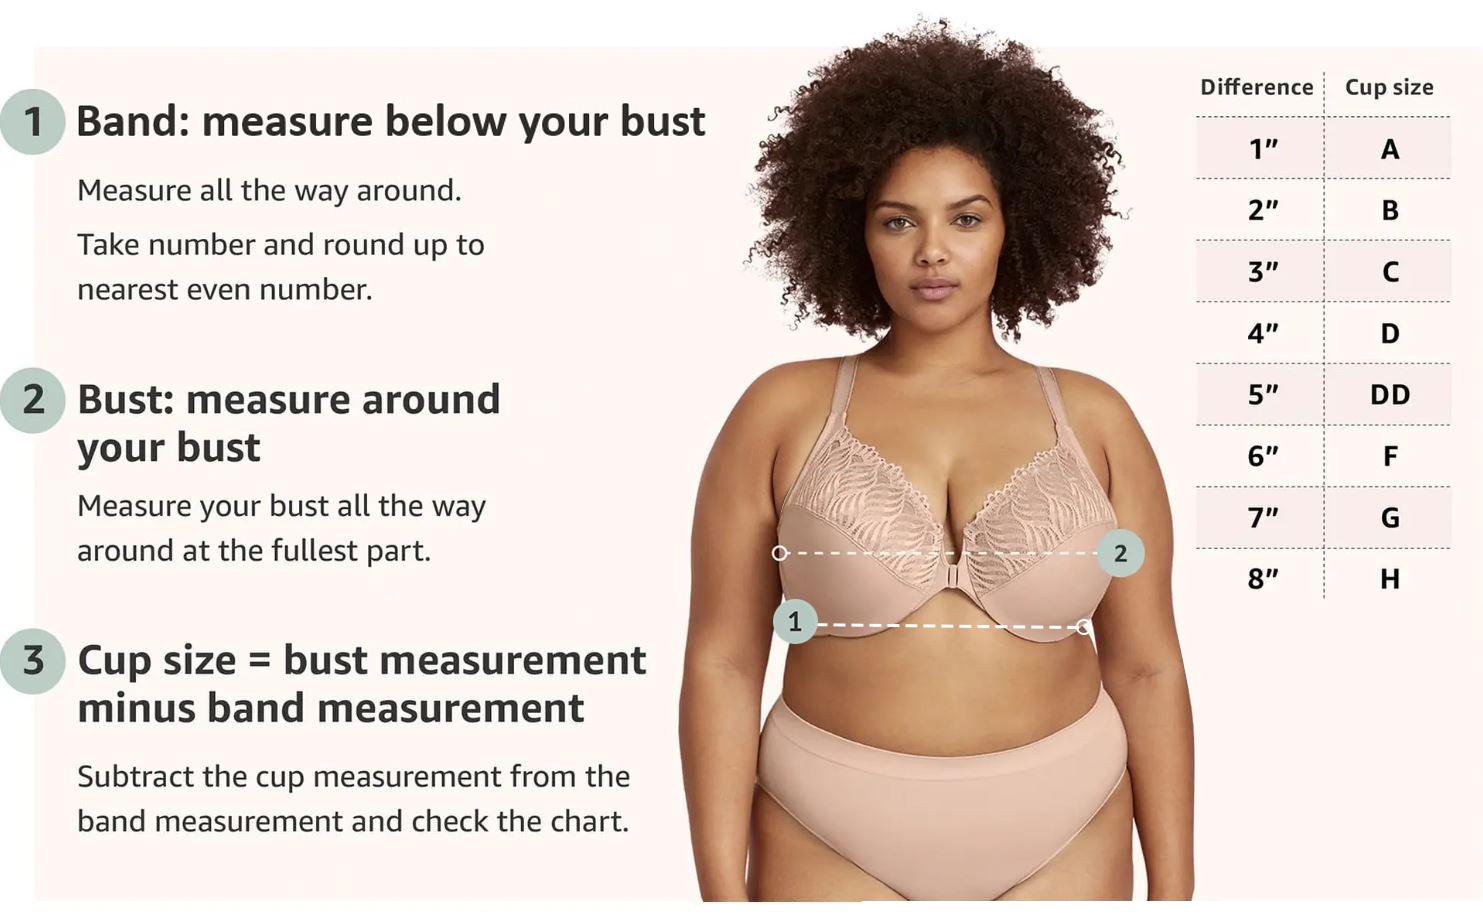 Image may contain: 1 person  Bra fitting, Bra, How are you feeling